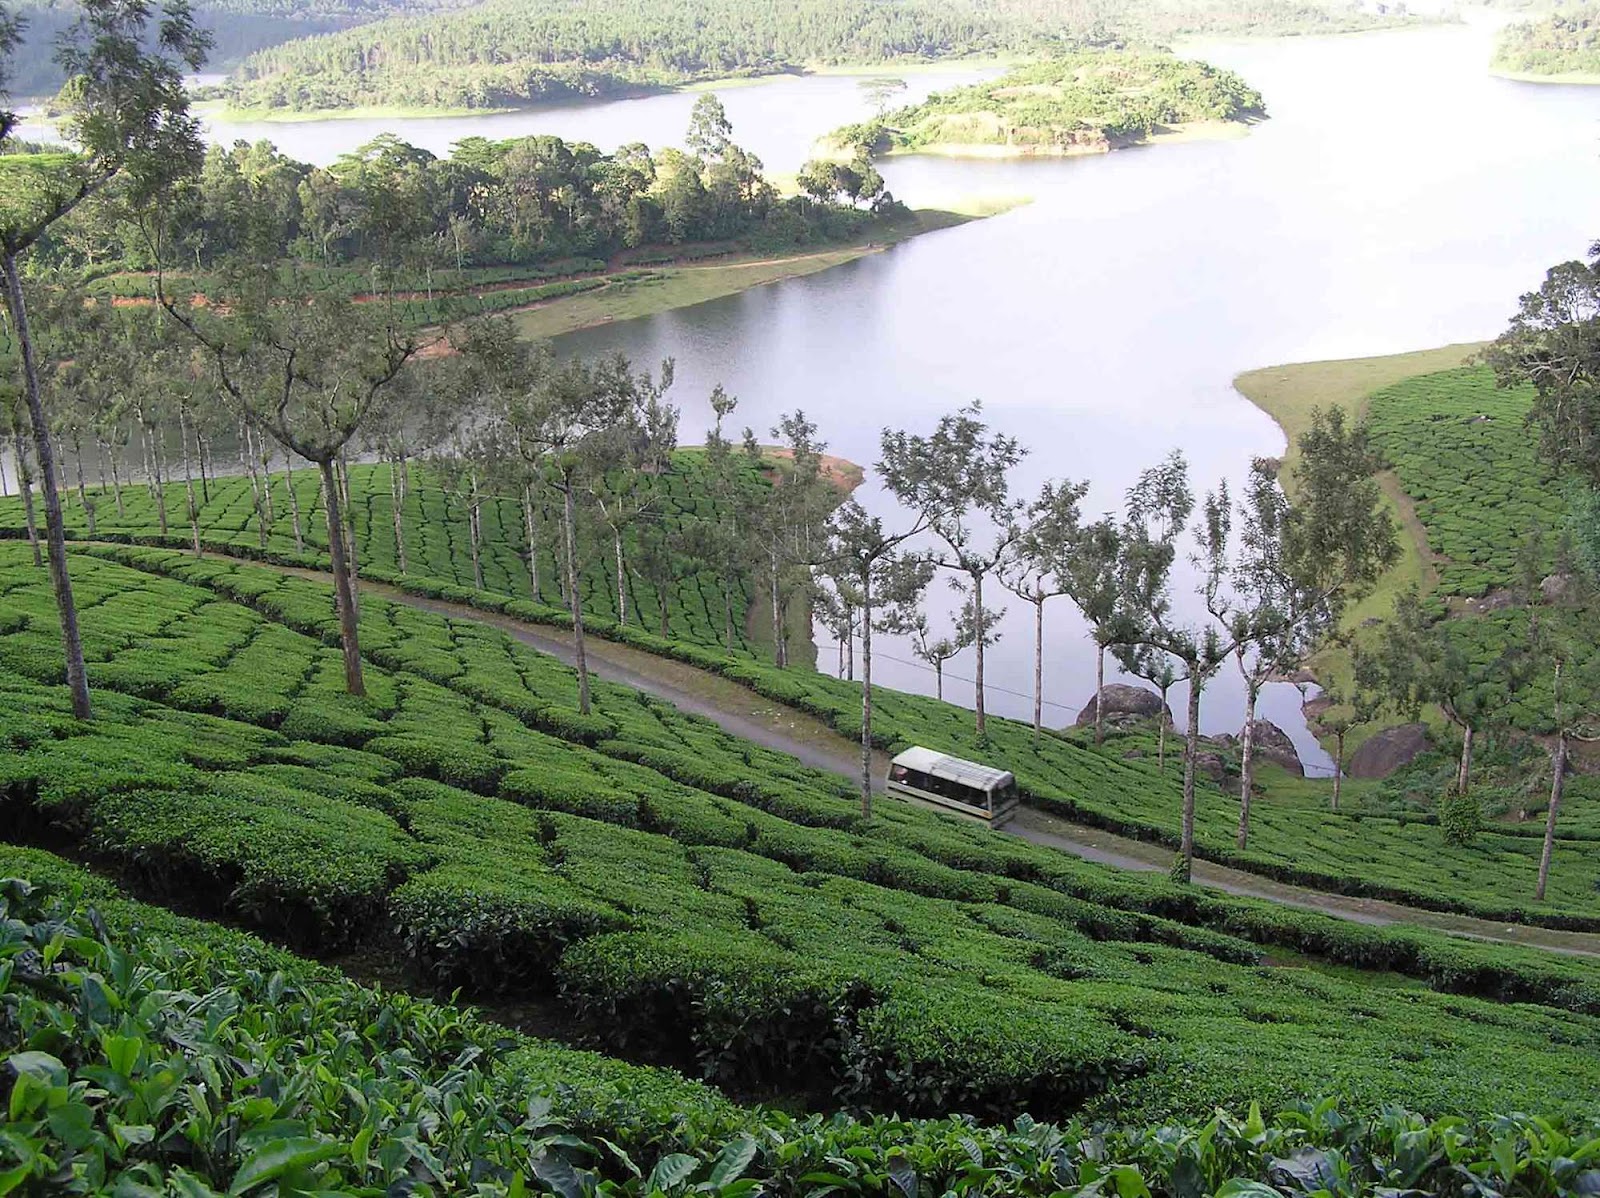 Tourism India | Travel in India | Holiday in India: Munnar - Kerala